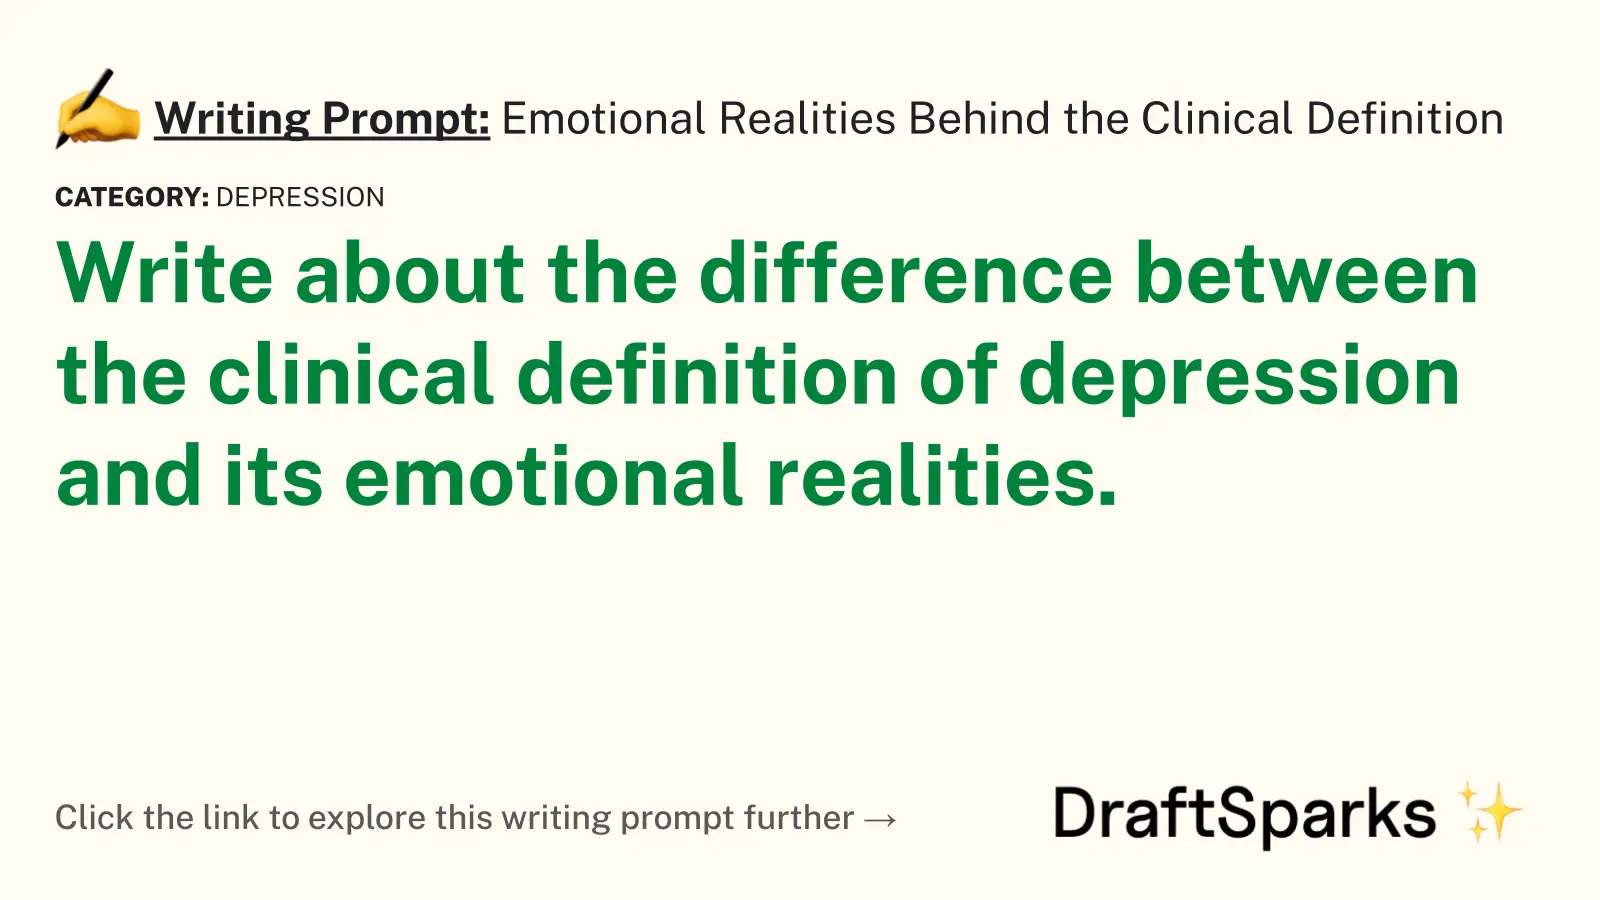 Emotional Realities Behind the Clinical Definition